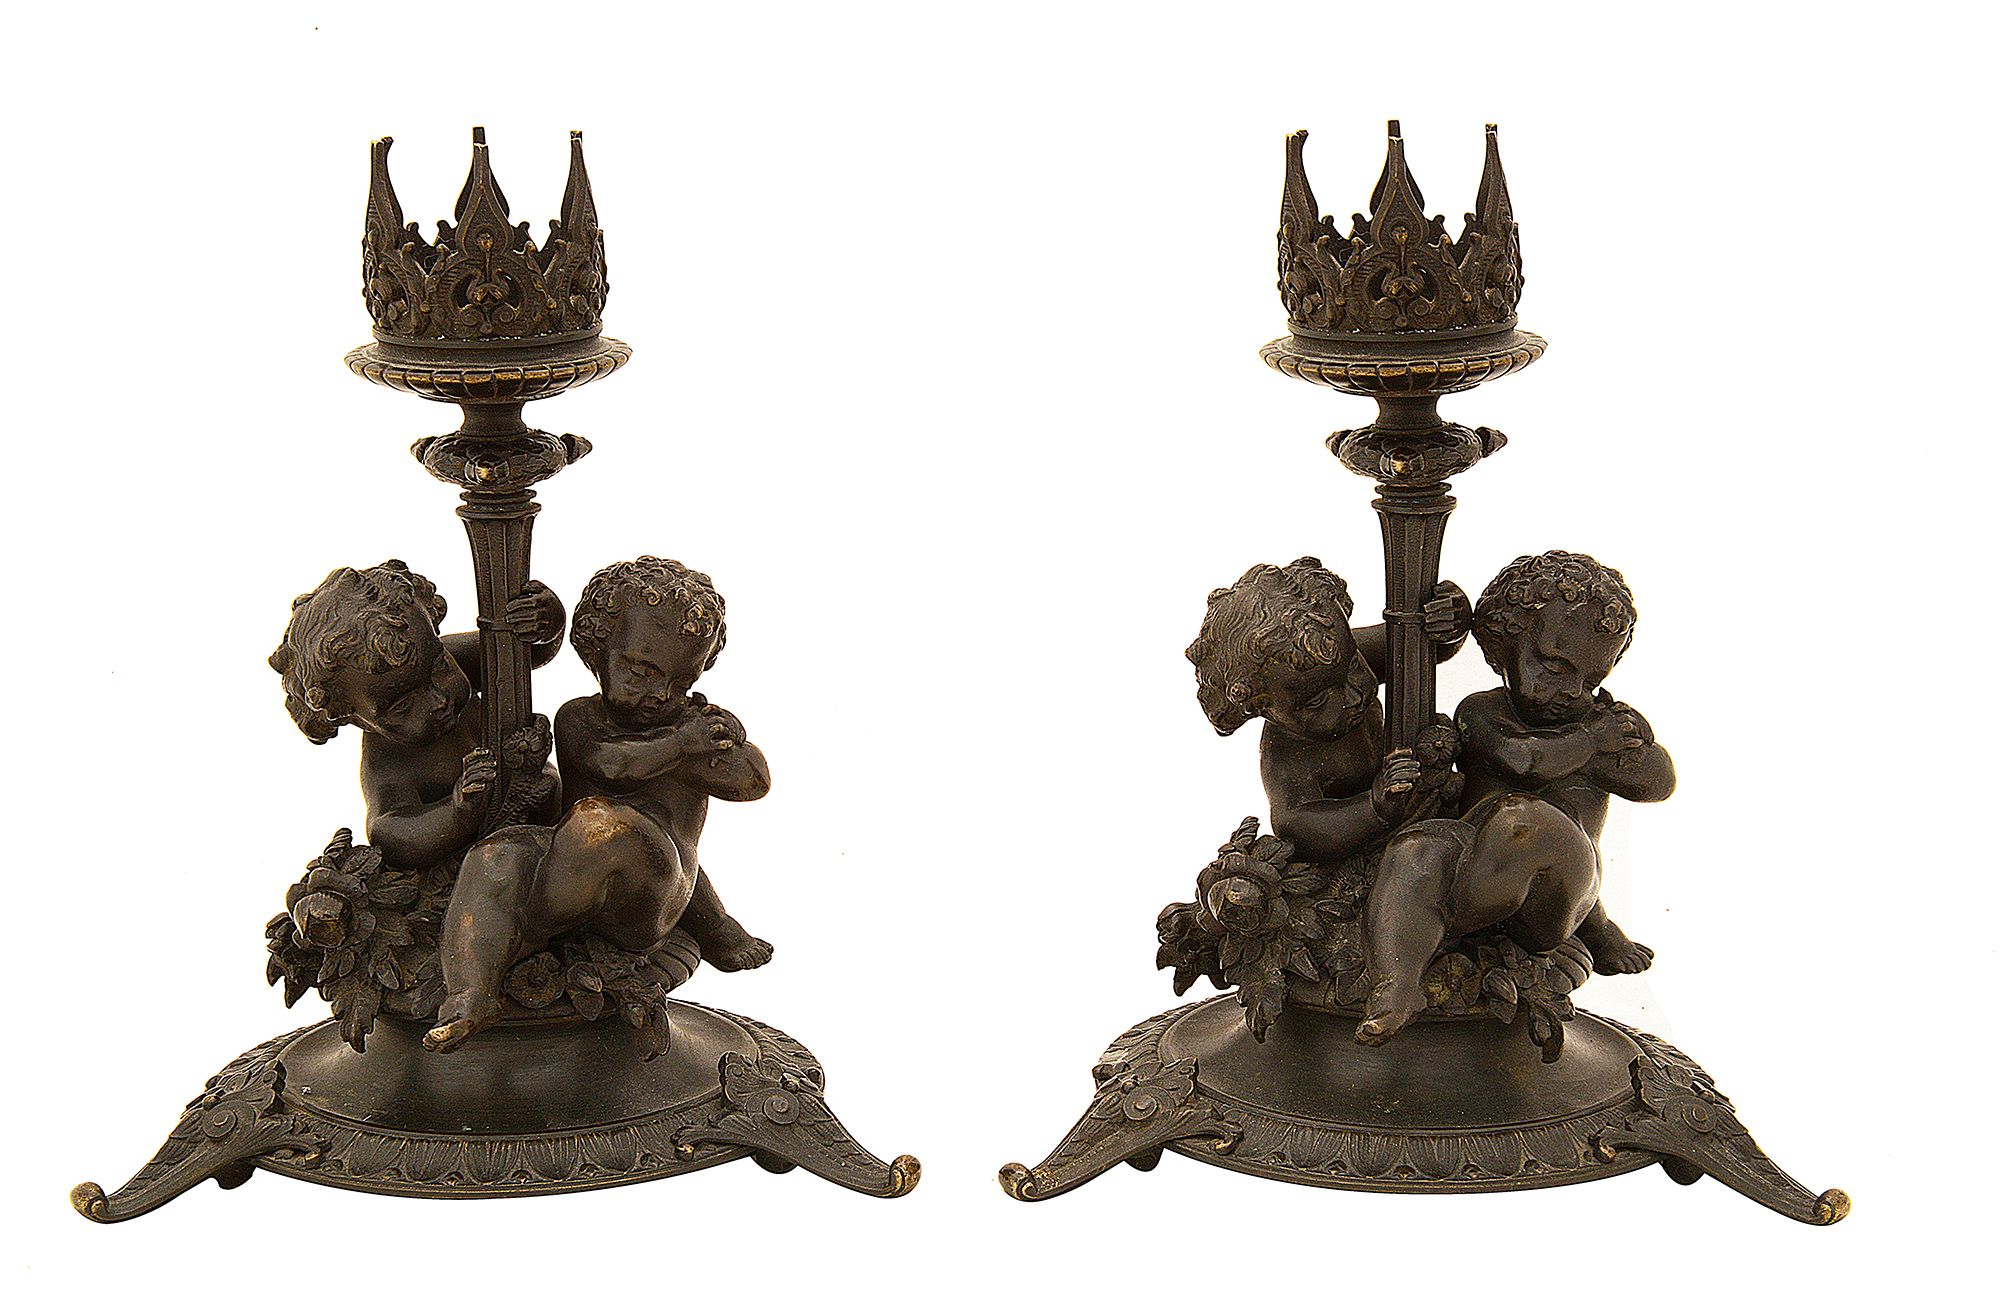 A pair of late 19th century French patinated bronze candlesticks by Fanniere Freres